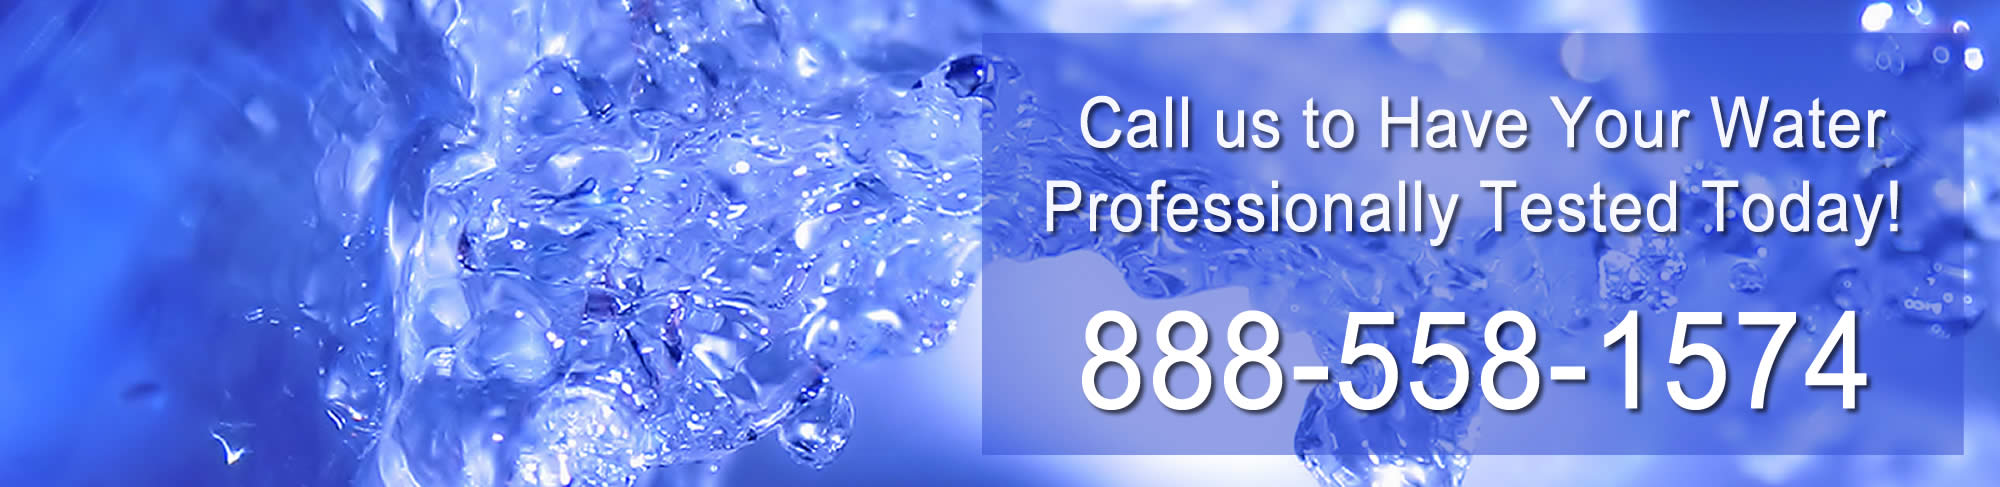 Specializing in Bristol CT Water Testing and Analysis